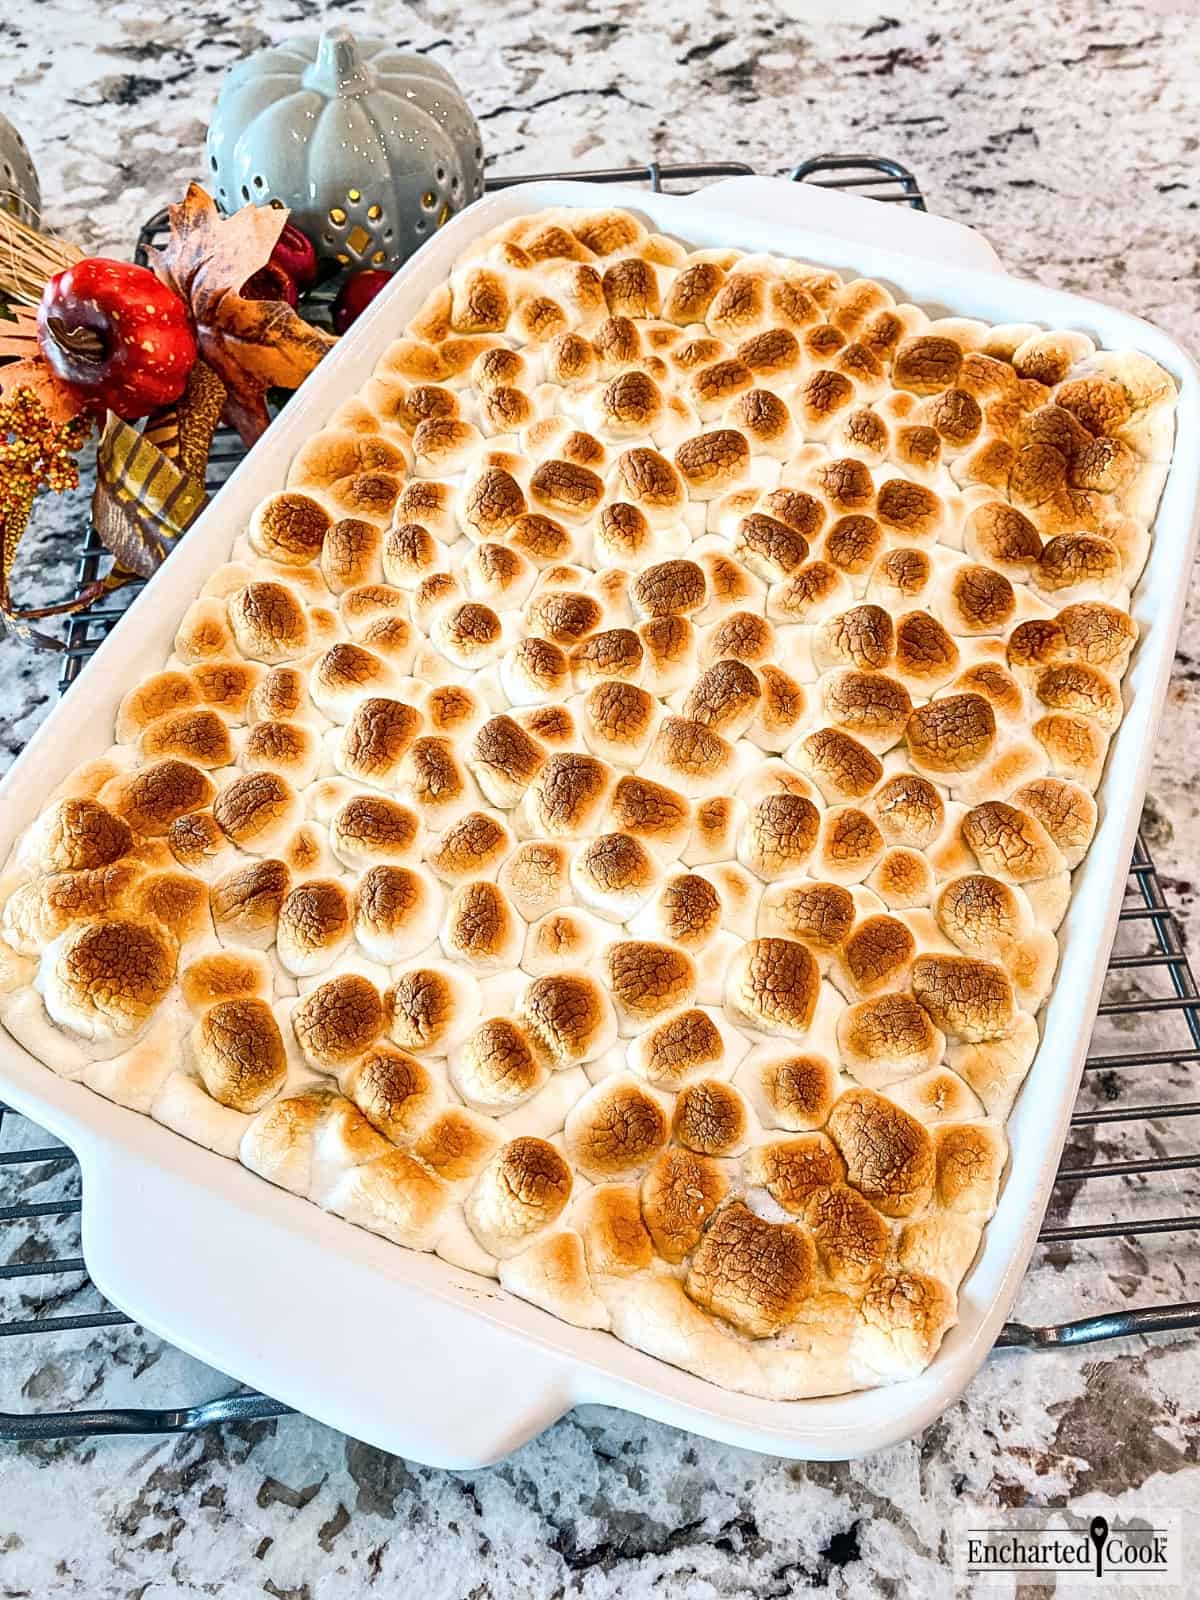 A fully baked sweet potato casserole topped with a layer of melted and toasted miniature marshmallows is ready to be served.